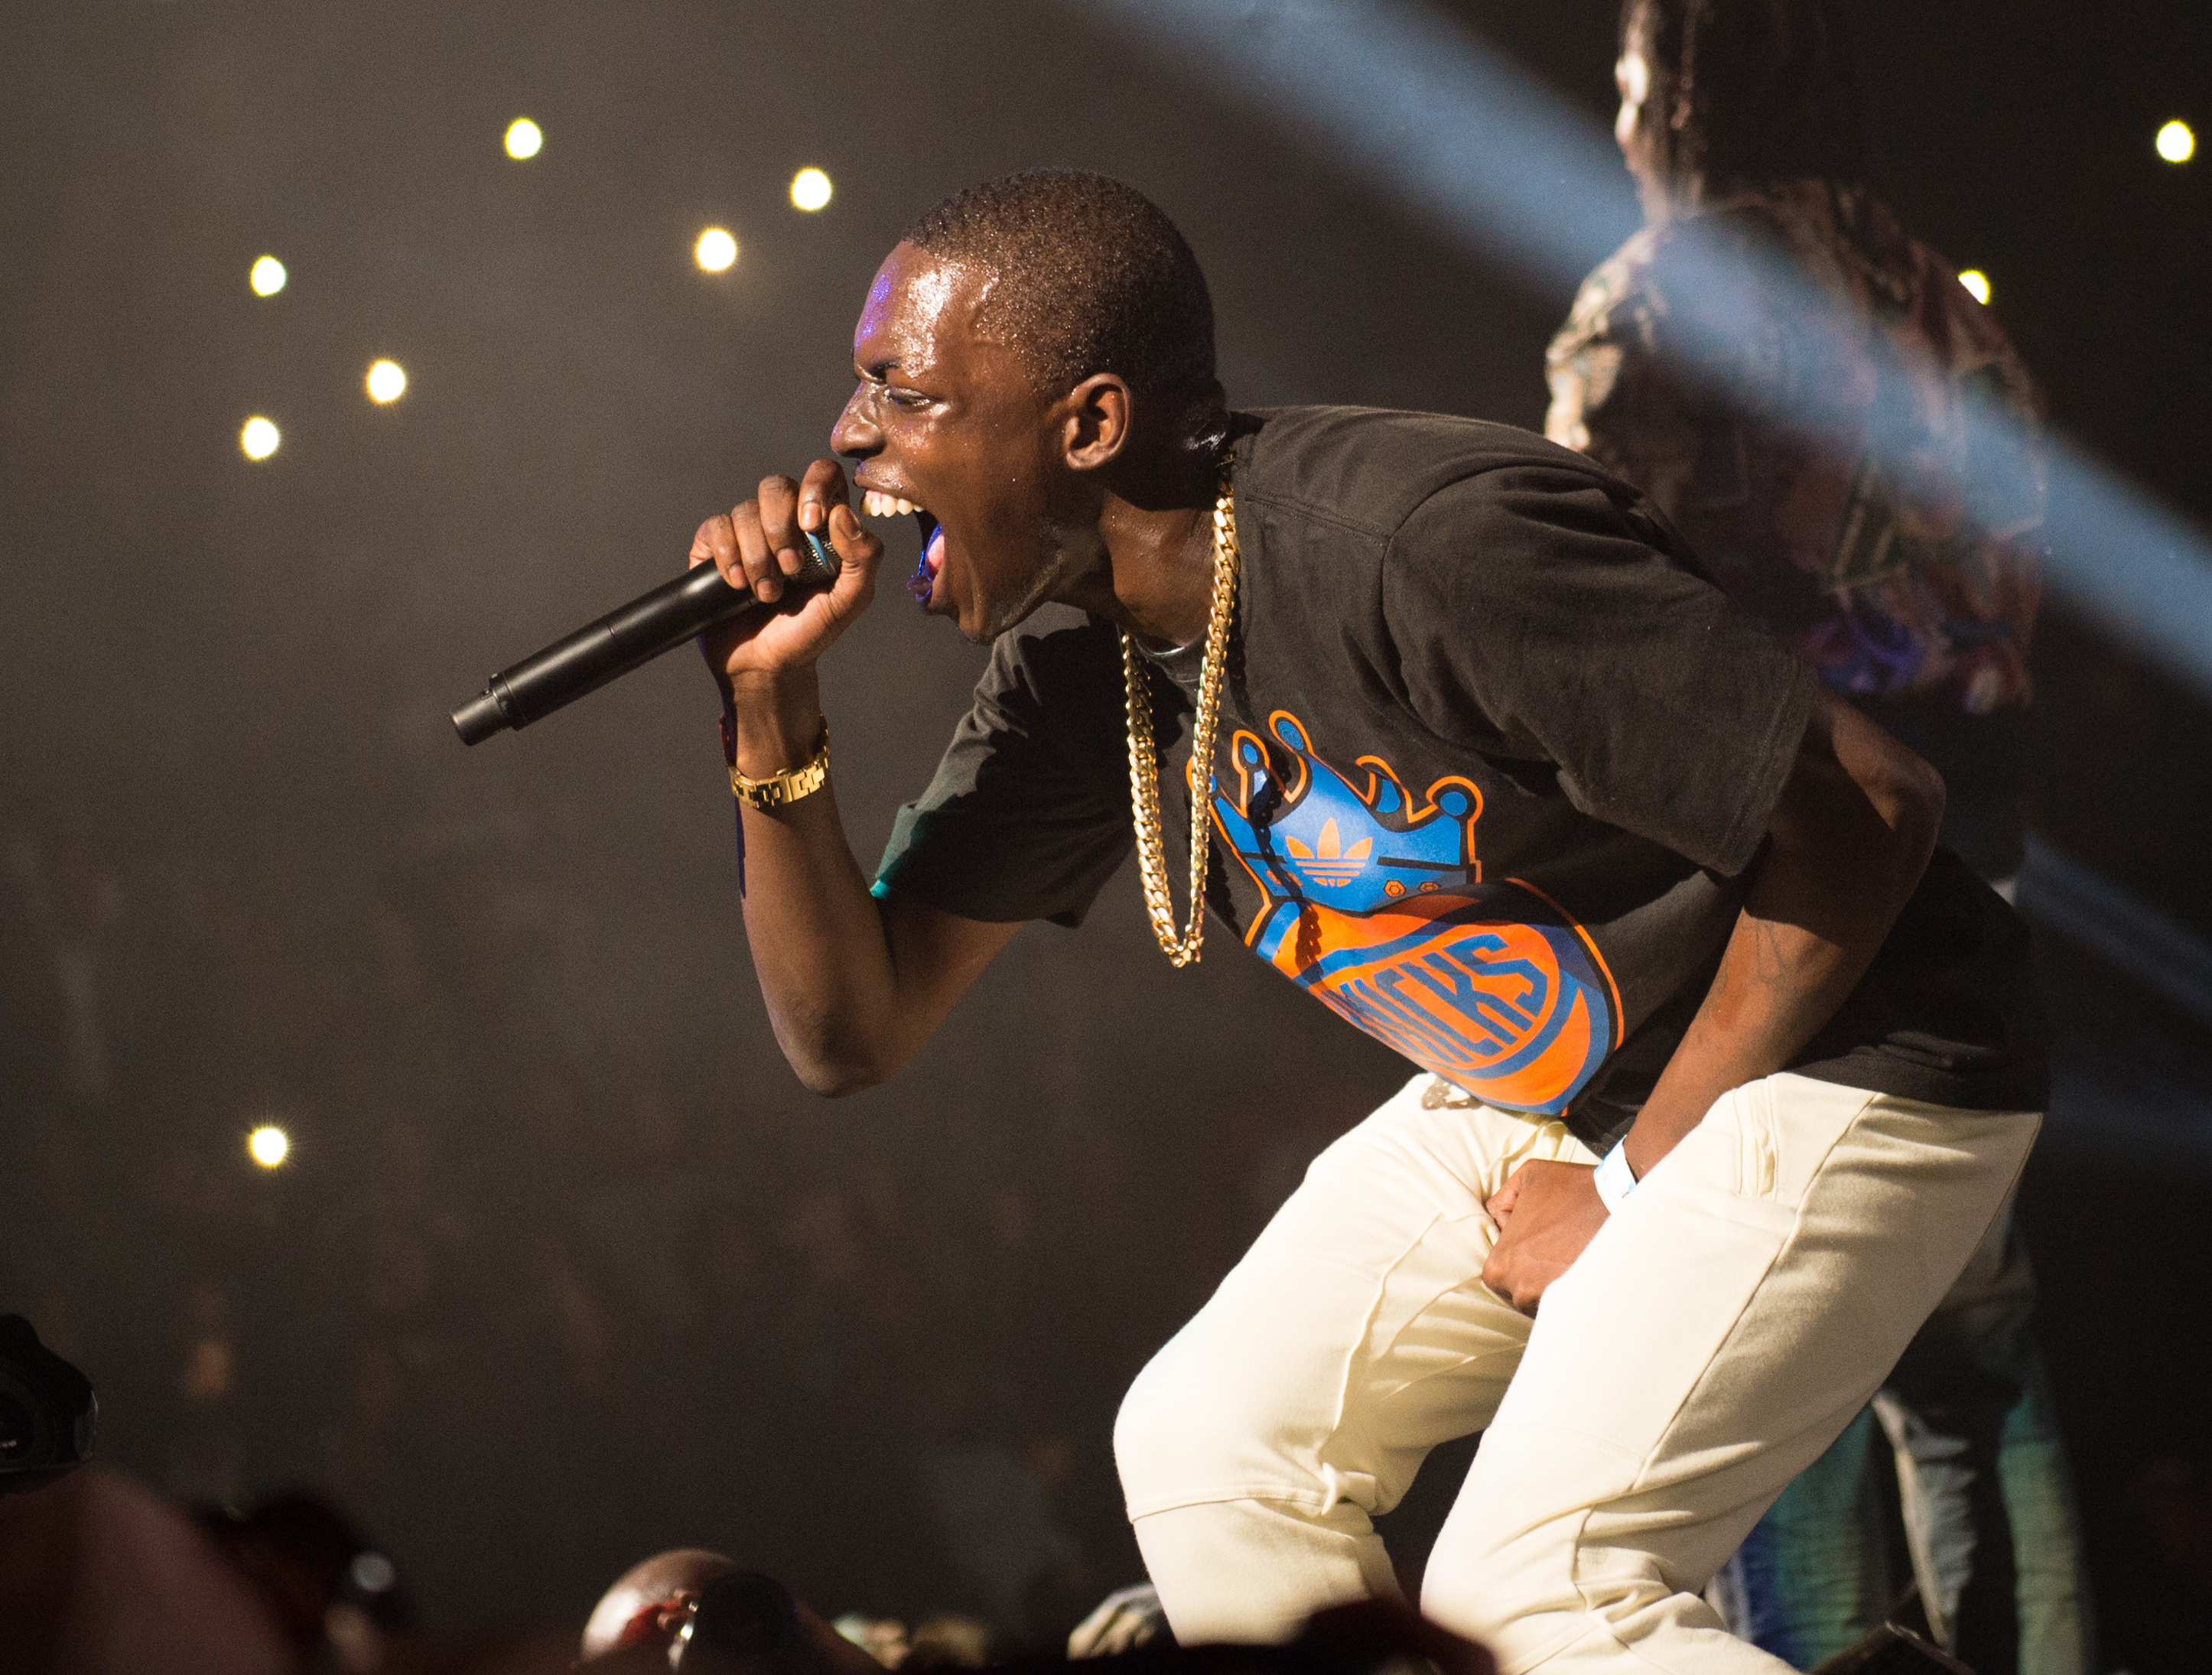 FILE - In this Oct. 30, 2014 file photo, Bobby Shmurda performs at Power 105.1's Powerhouse 2014 at the Barclays Center in the Brooklyn borough of New York. Shmurda pleaded guilty Friday, Sept. 9, 2016, to conspiracy and illegal weapon possession. Authorities say a minimum seven-year sentence is required by his plea deal. (Photo by Scott Roth/Invision/AP)